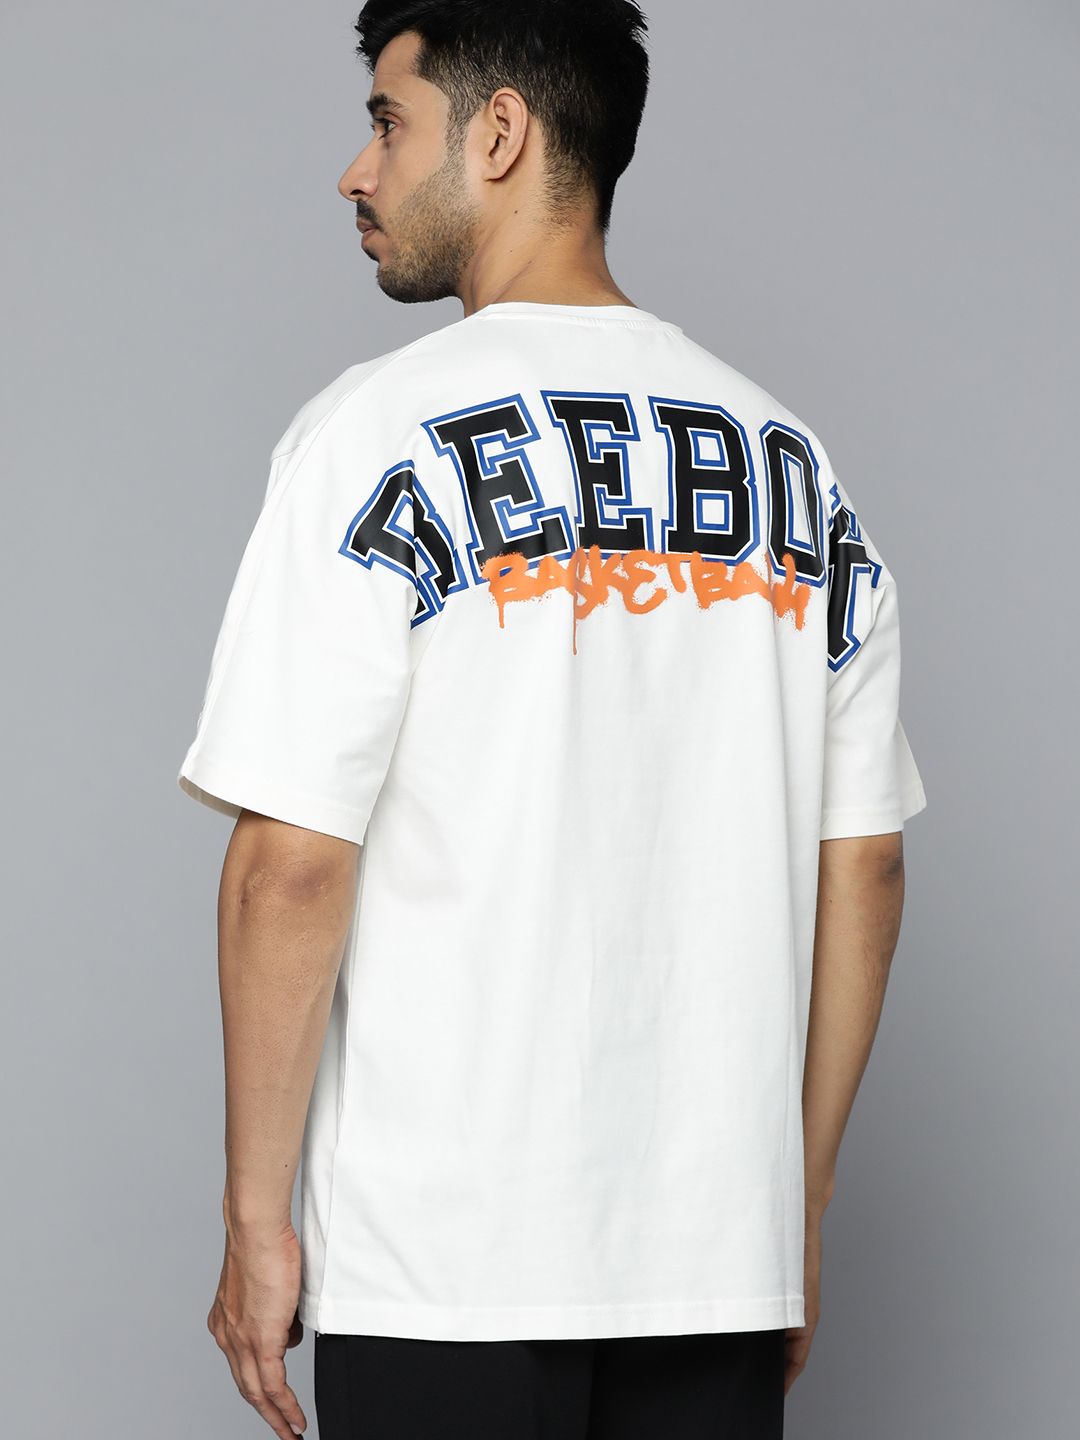 Reebok Classic Unisex White & Navy Blue Pure Cotton Typography Printed T-shirt Price in India